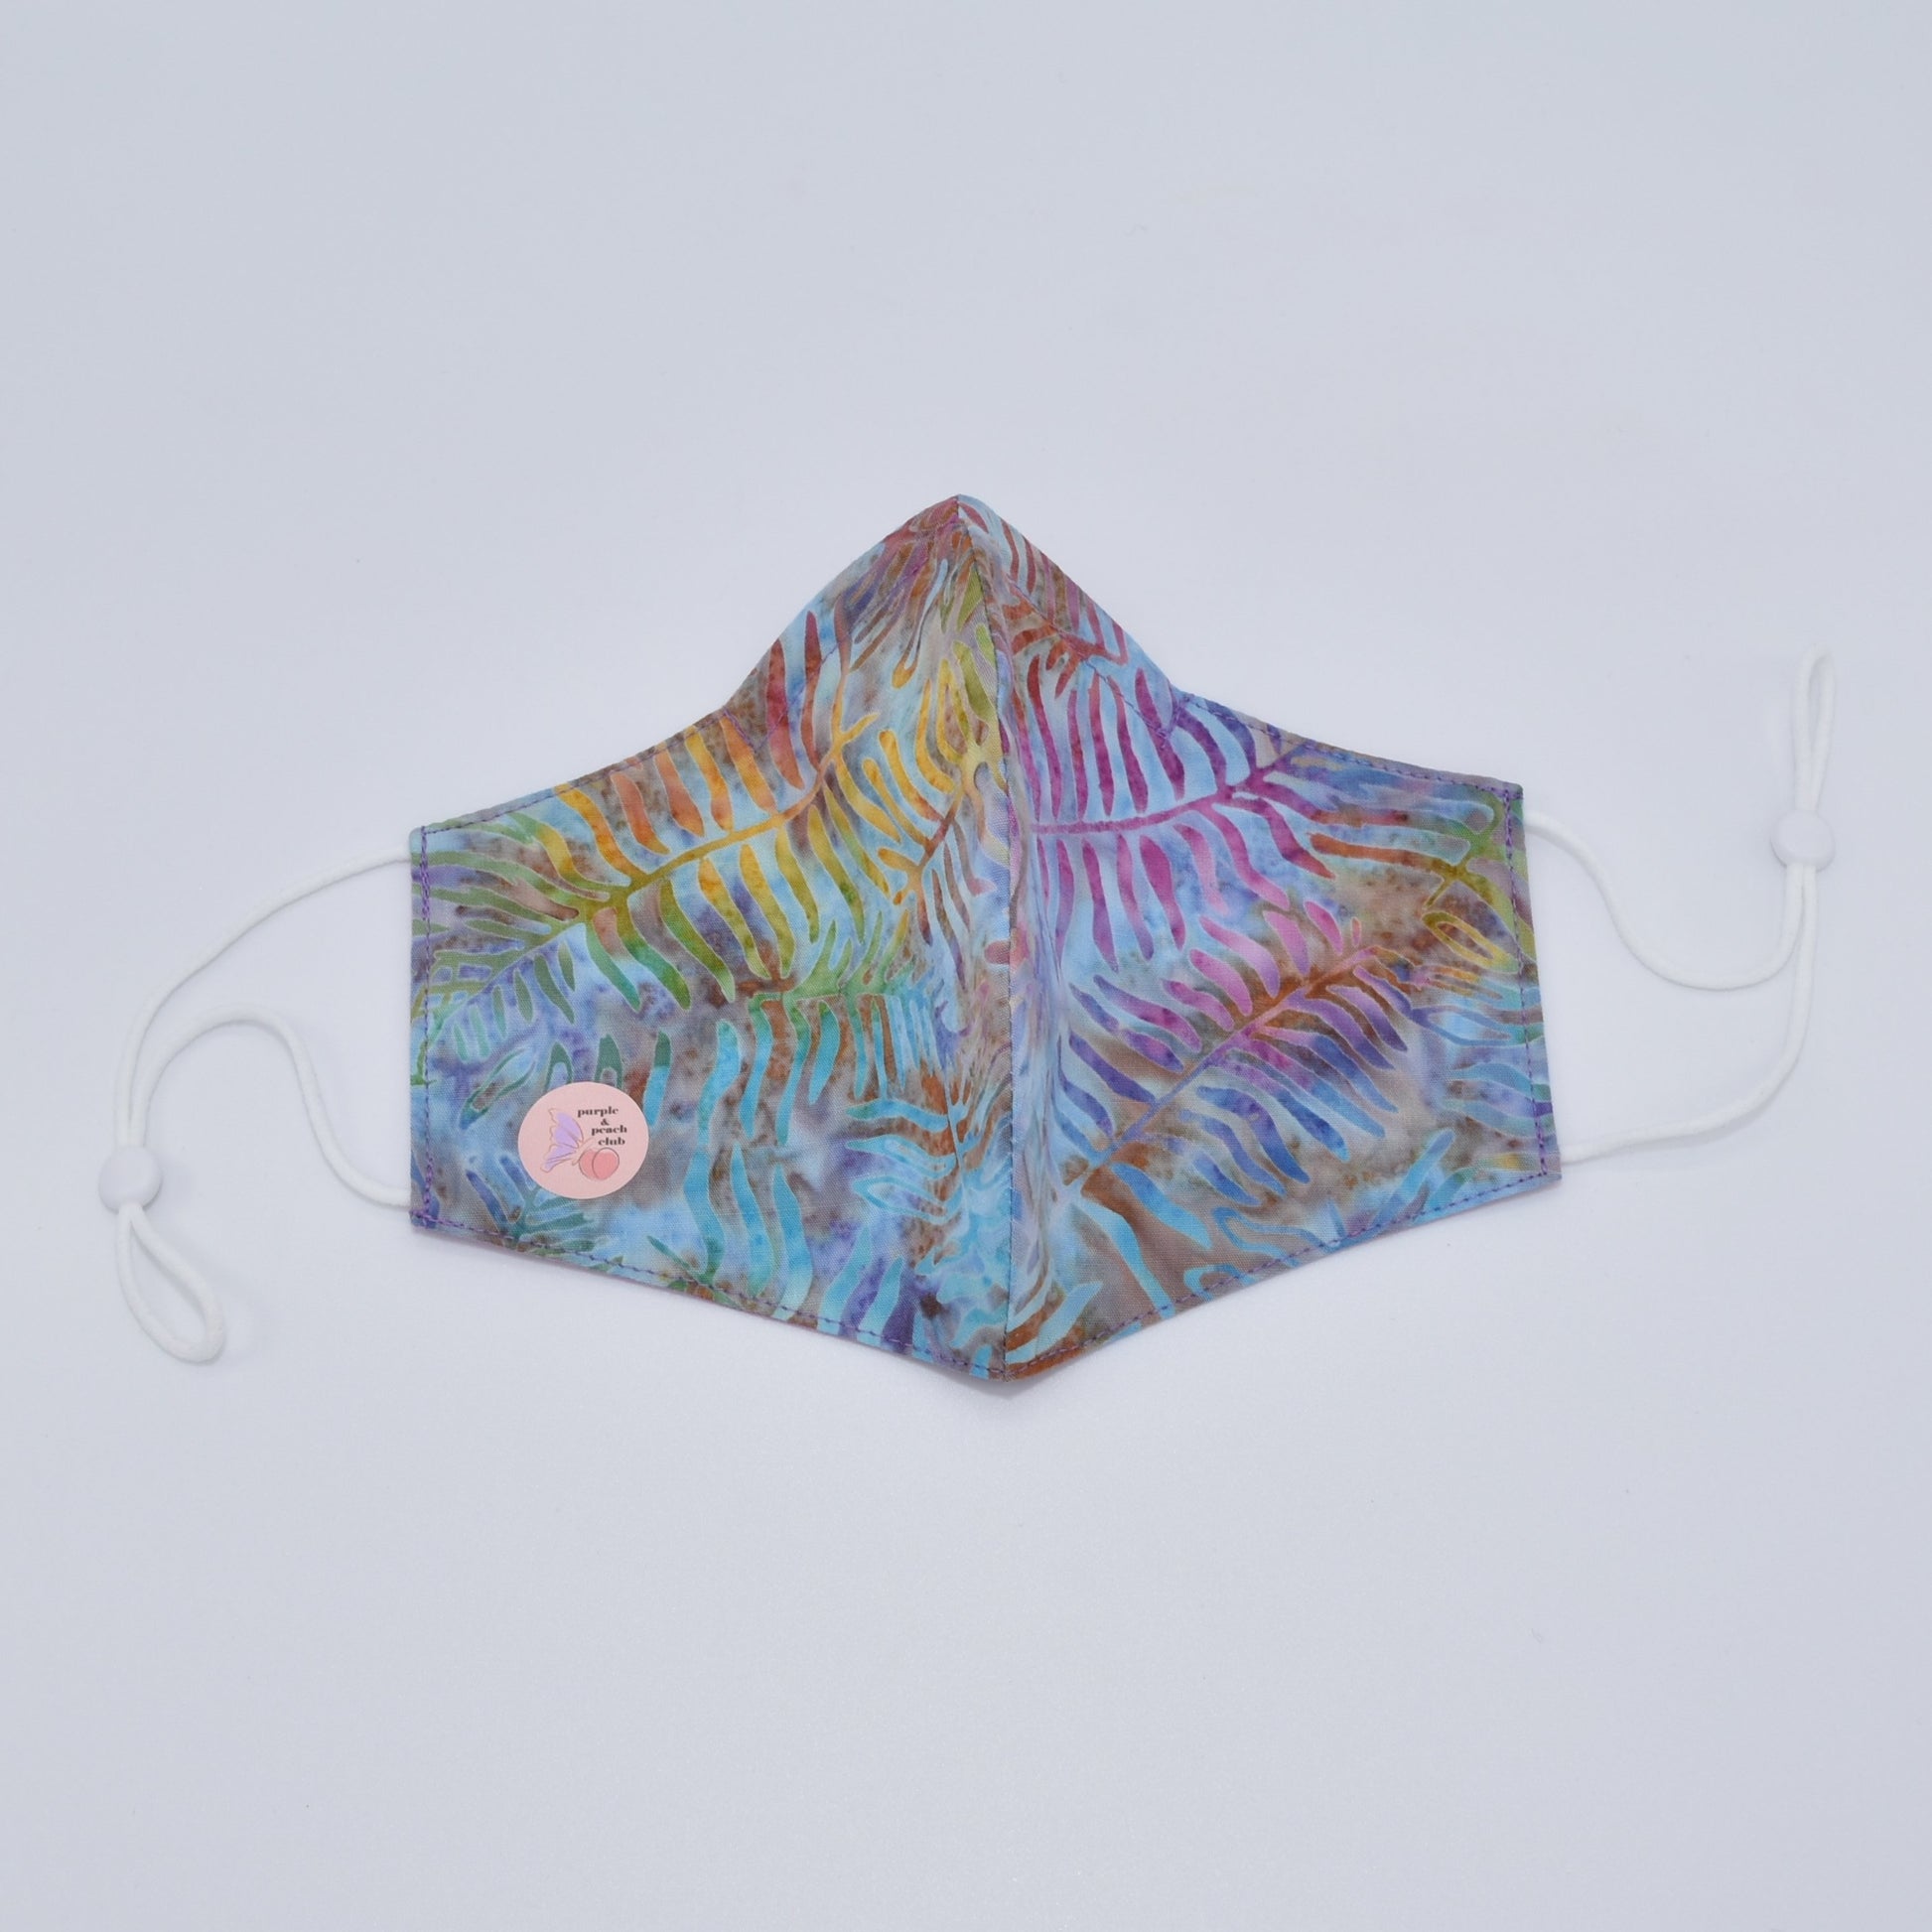 This leaf tie-dye print cotton mask is reversible and double-layered, built for comfort with an adjustable nose bridge and adjustable ear straps. 